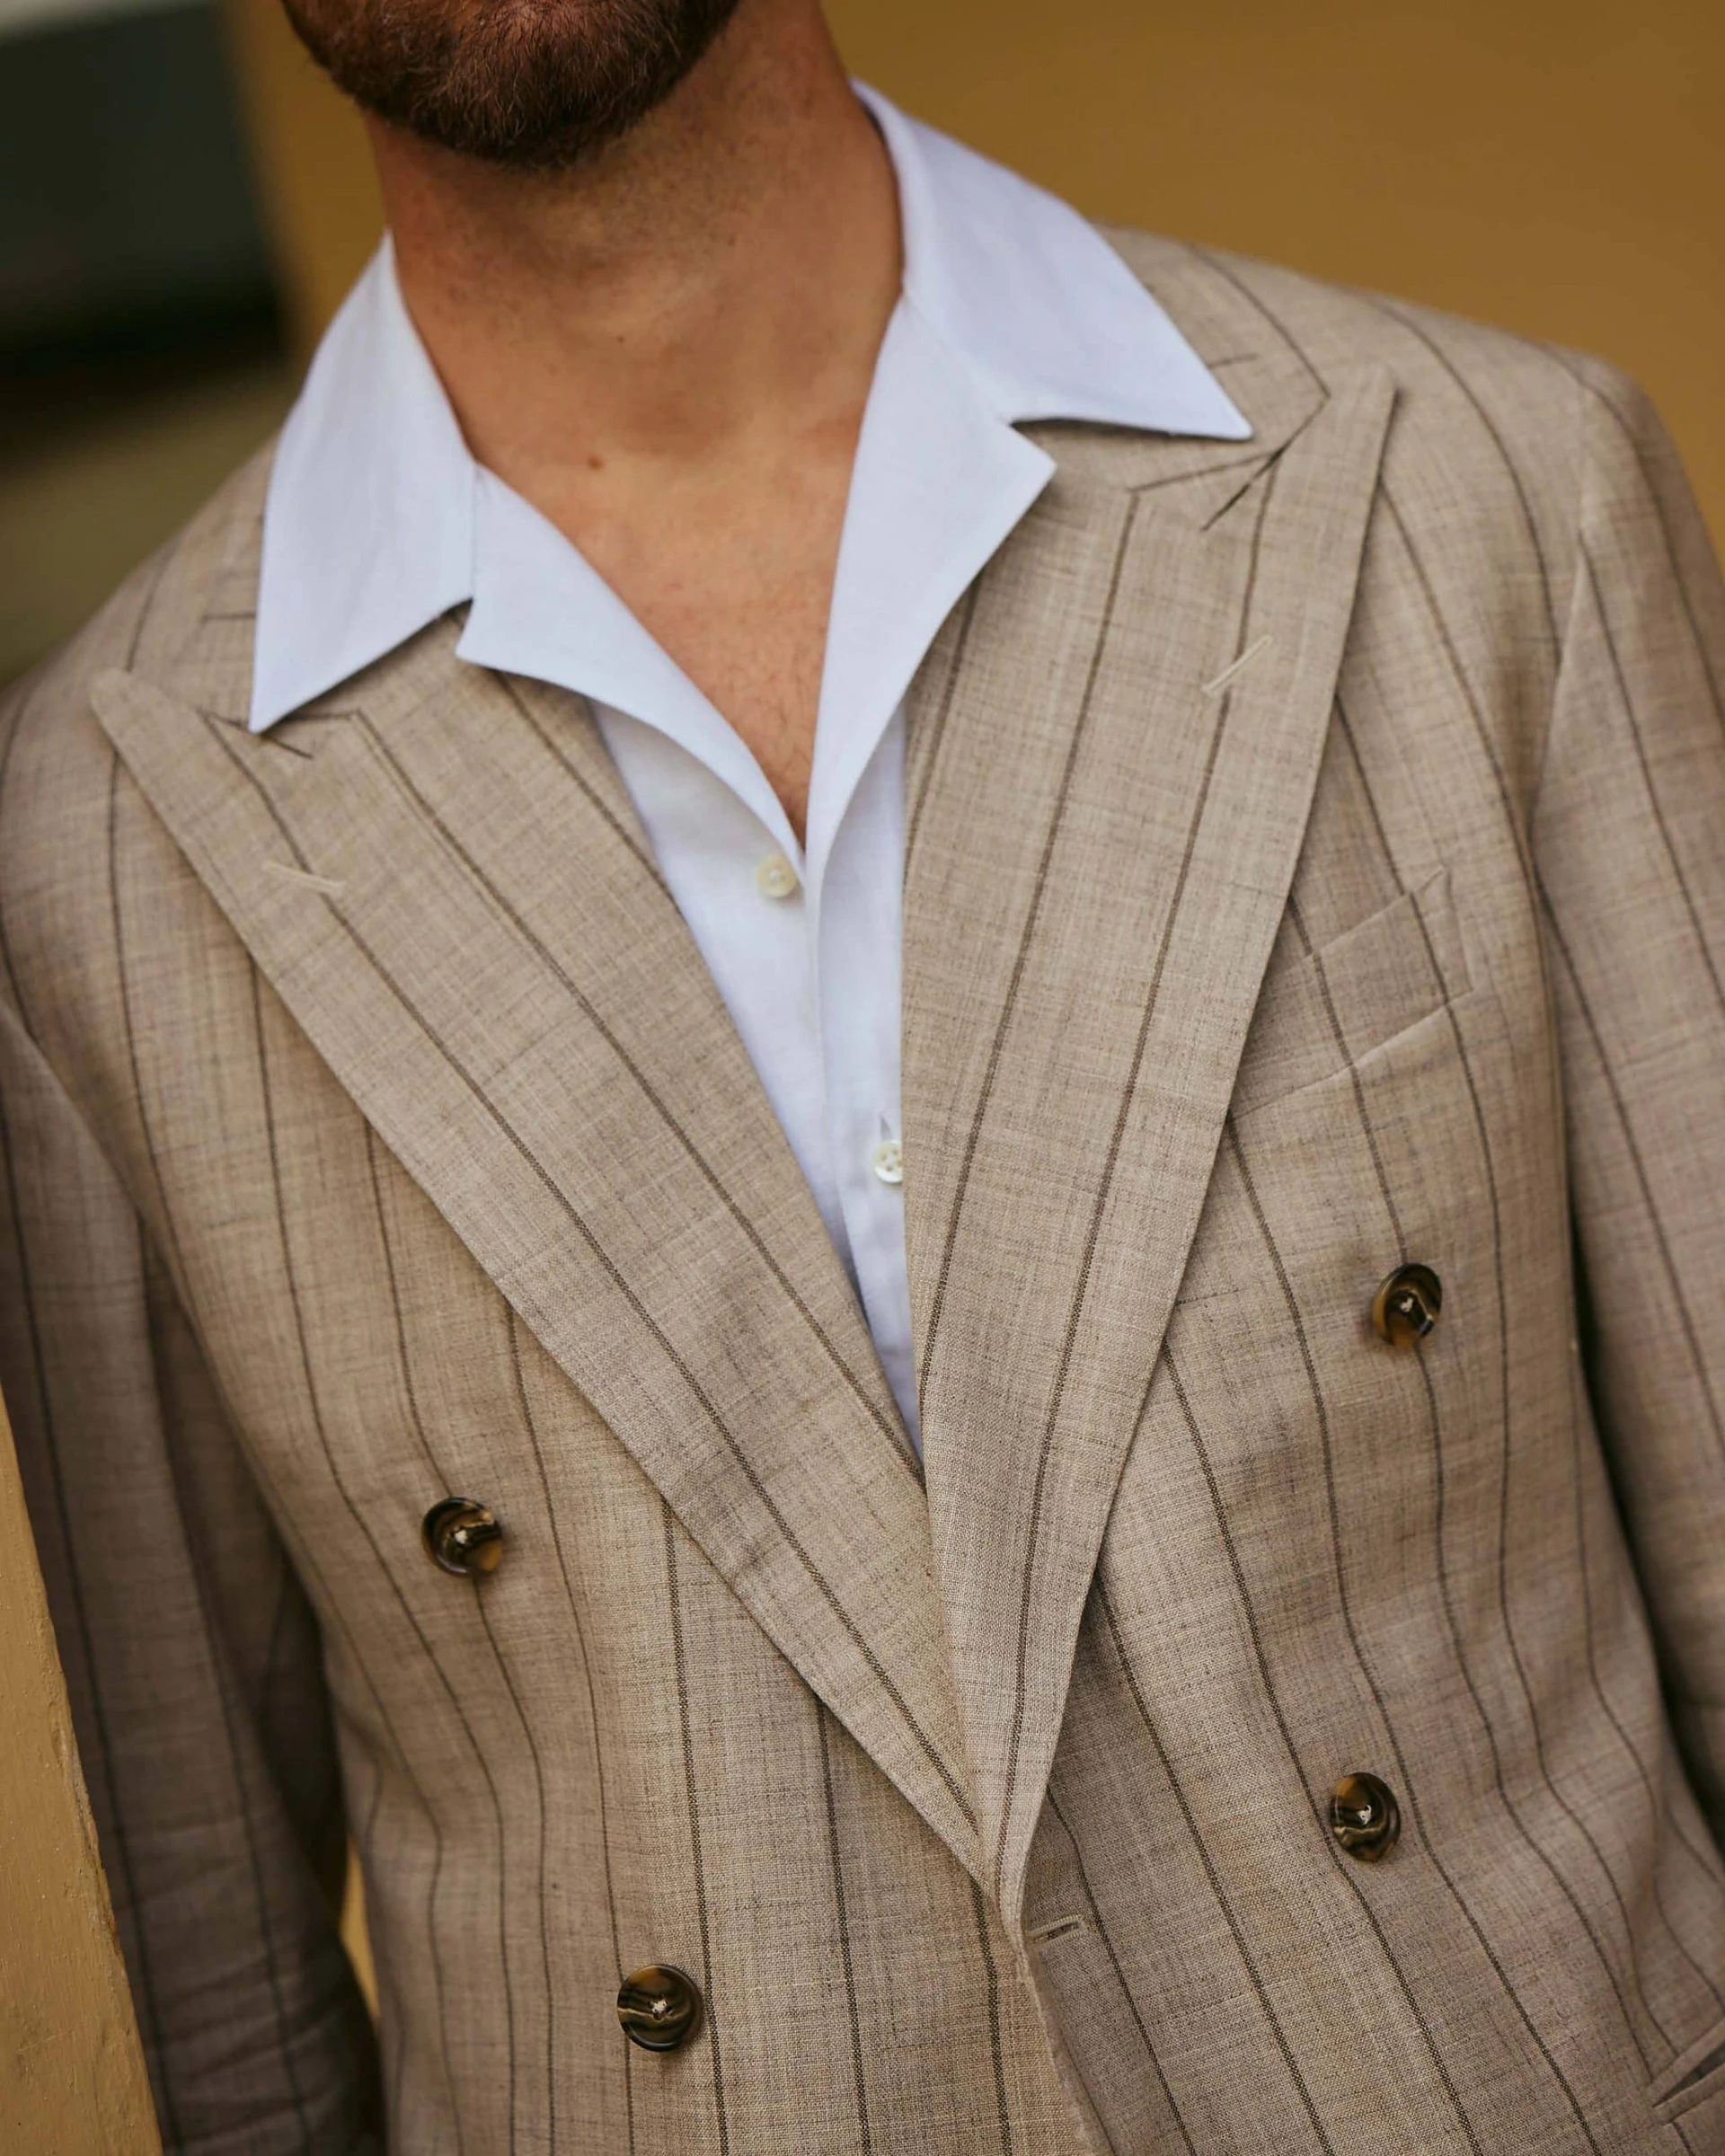 carlos domord at pitti uomo wearing taupe beige striped suit and a linen camp collar shirt